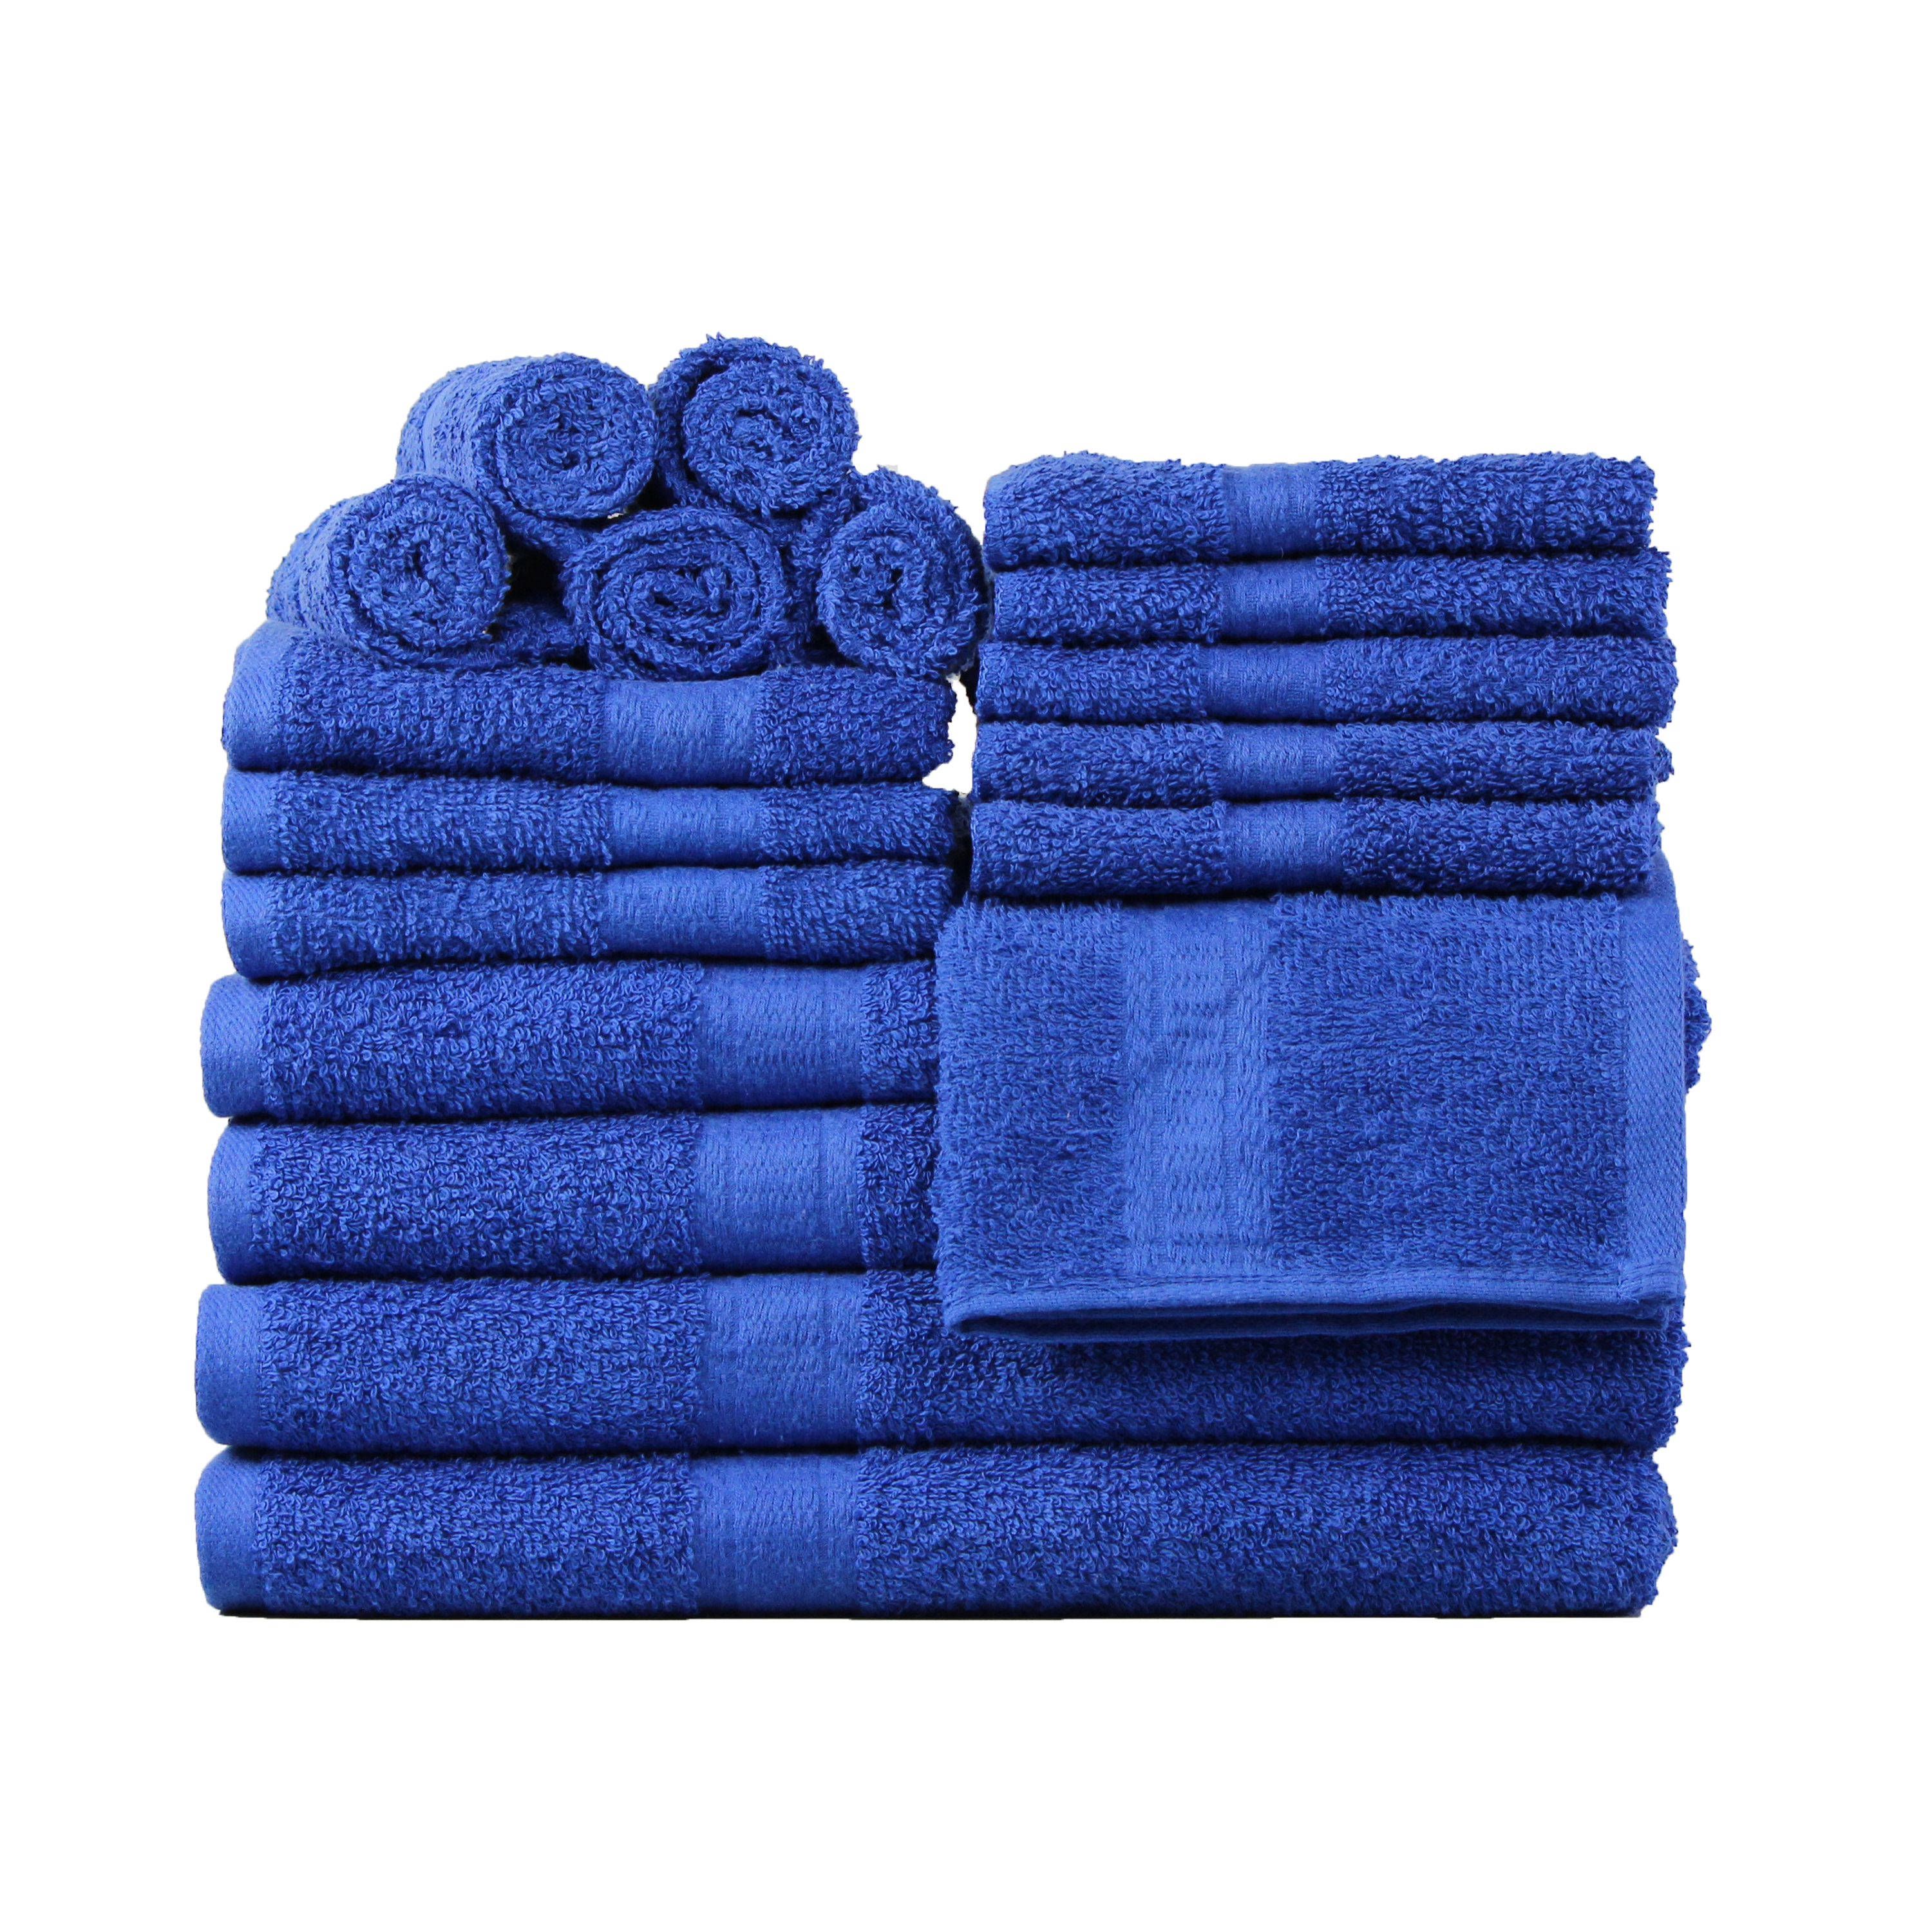 Mainstays Basic Solid 18-Piece Bath Towel Set Collection, Royal Spice - image 1 of 10